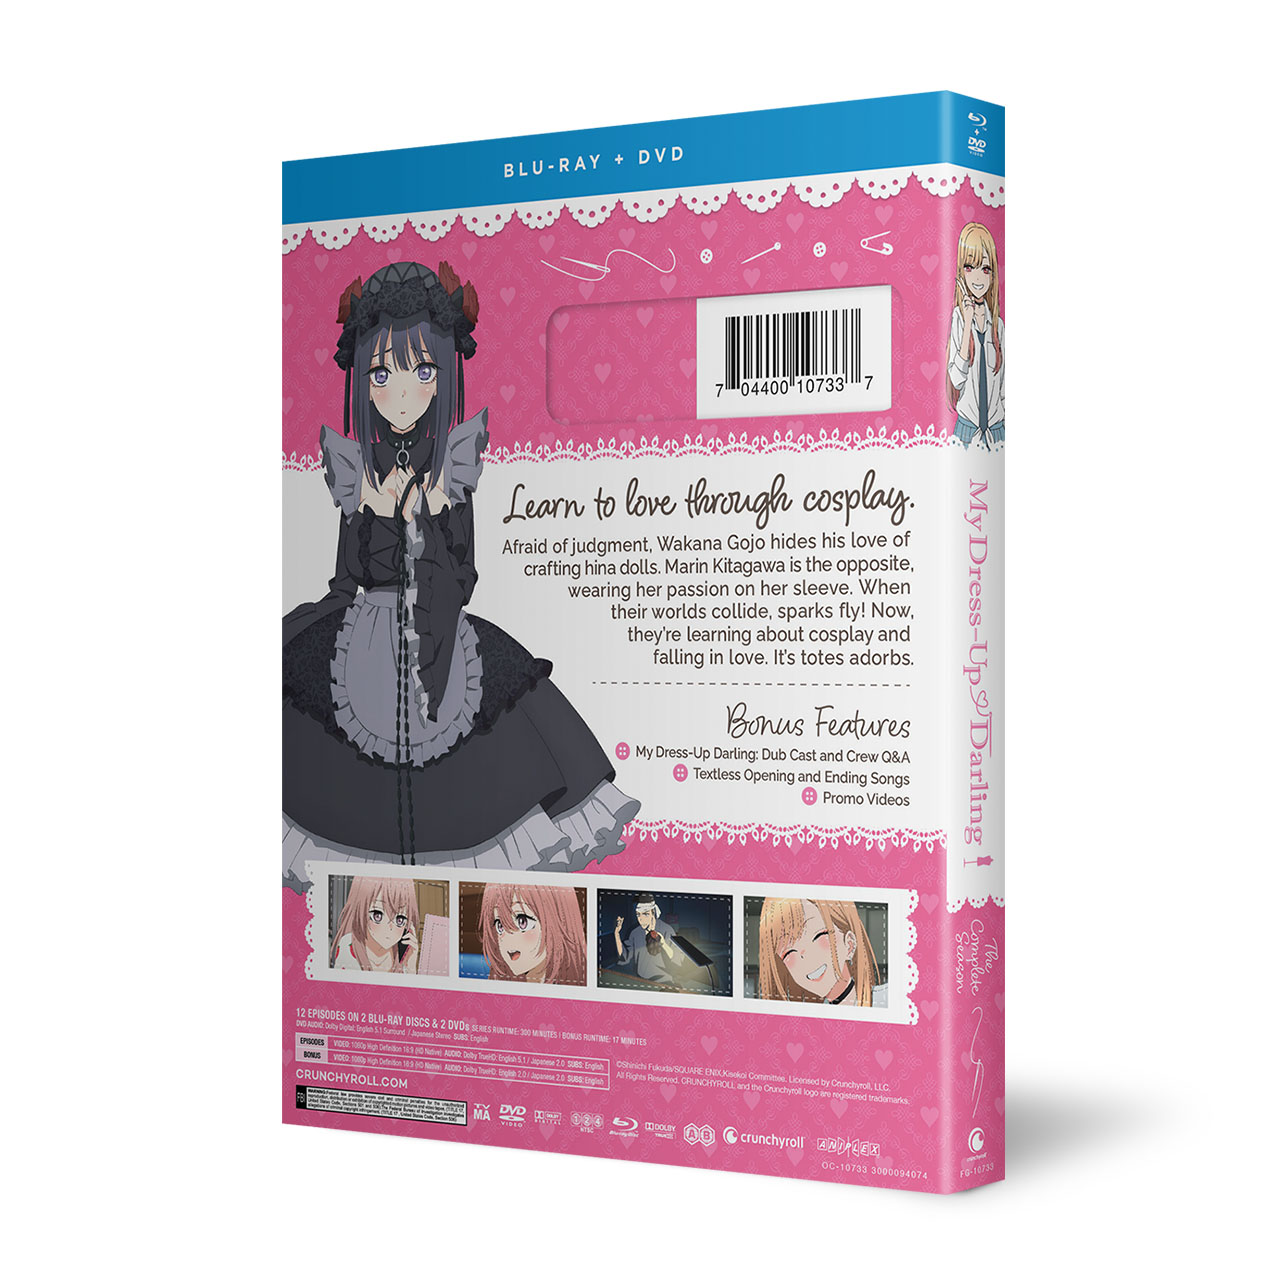 My Dress Up Darling - The Complete Season - Blu-ray + DVD image count 3